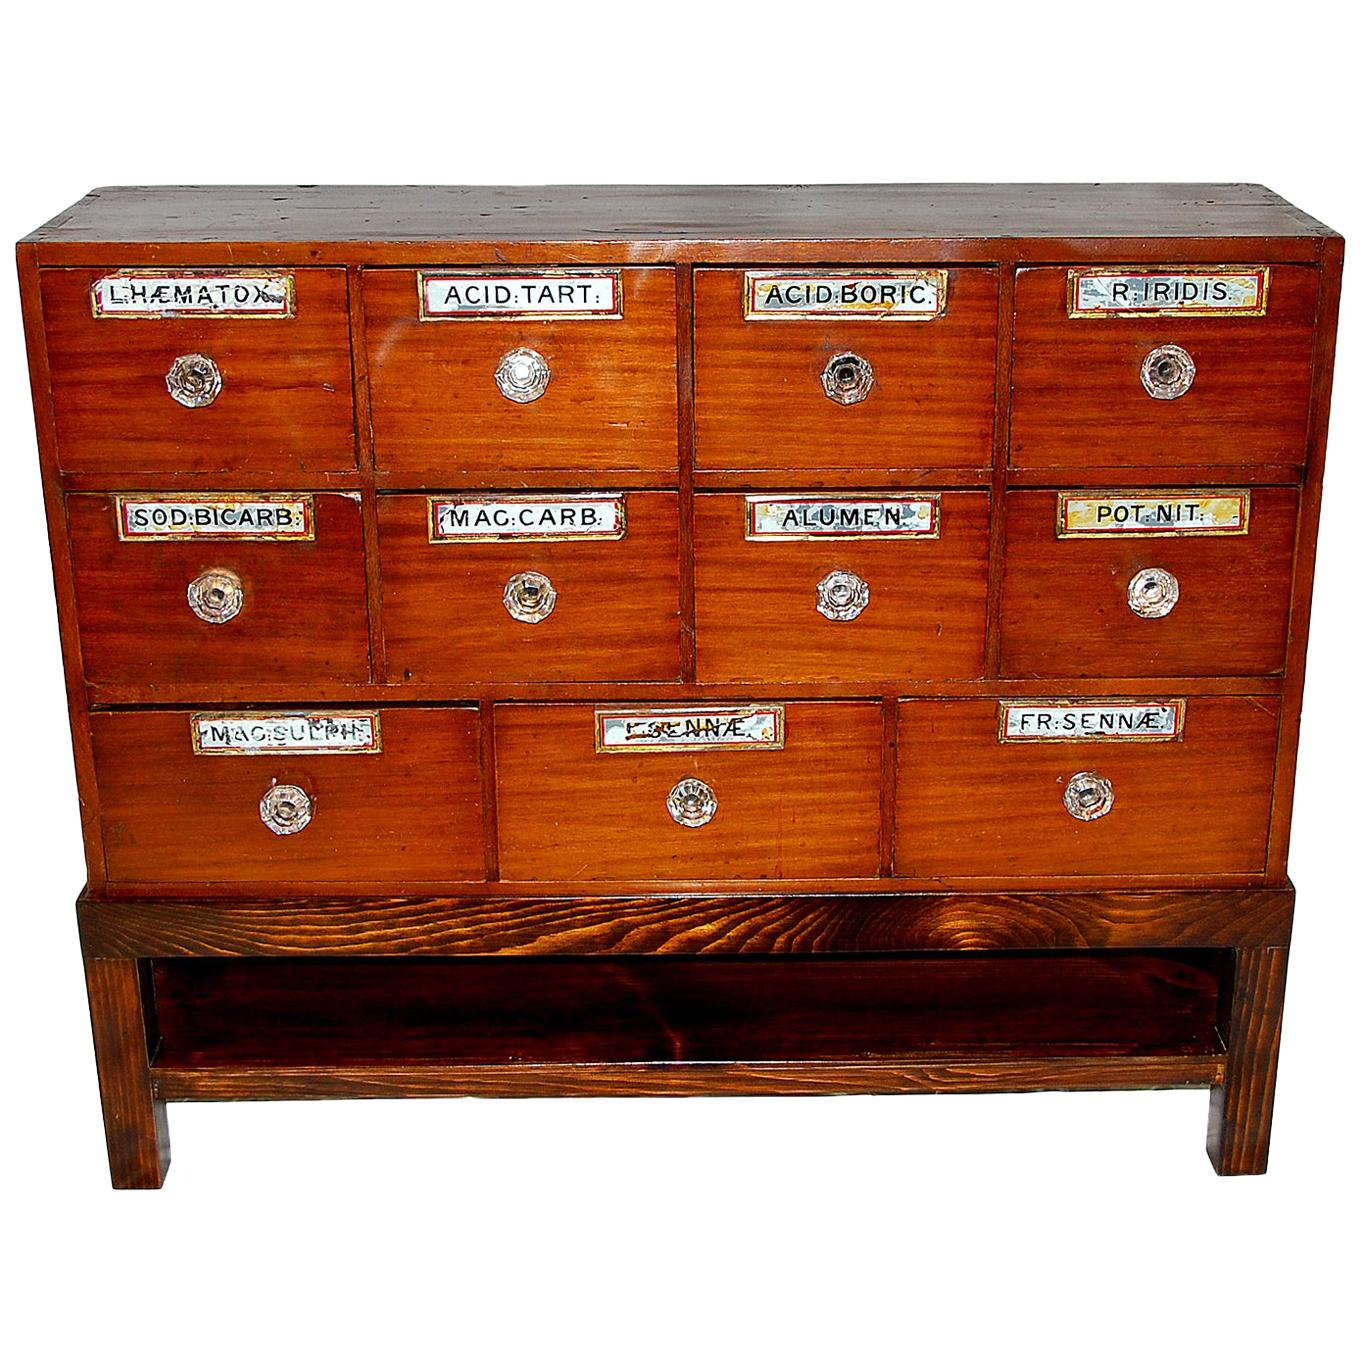 English 19th Century Apothecary Chest in Mahogany and Pine Now on Bespoke Stand